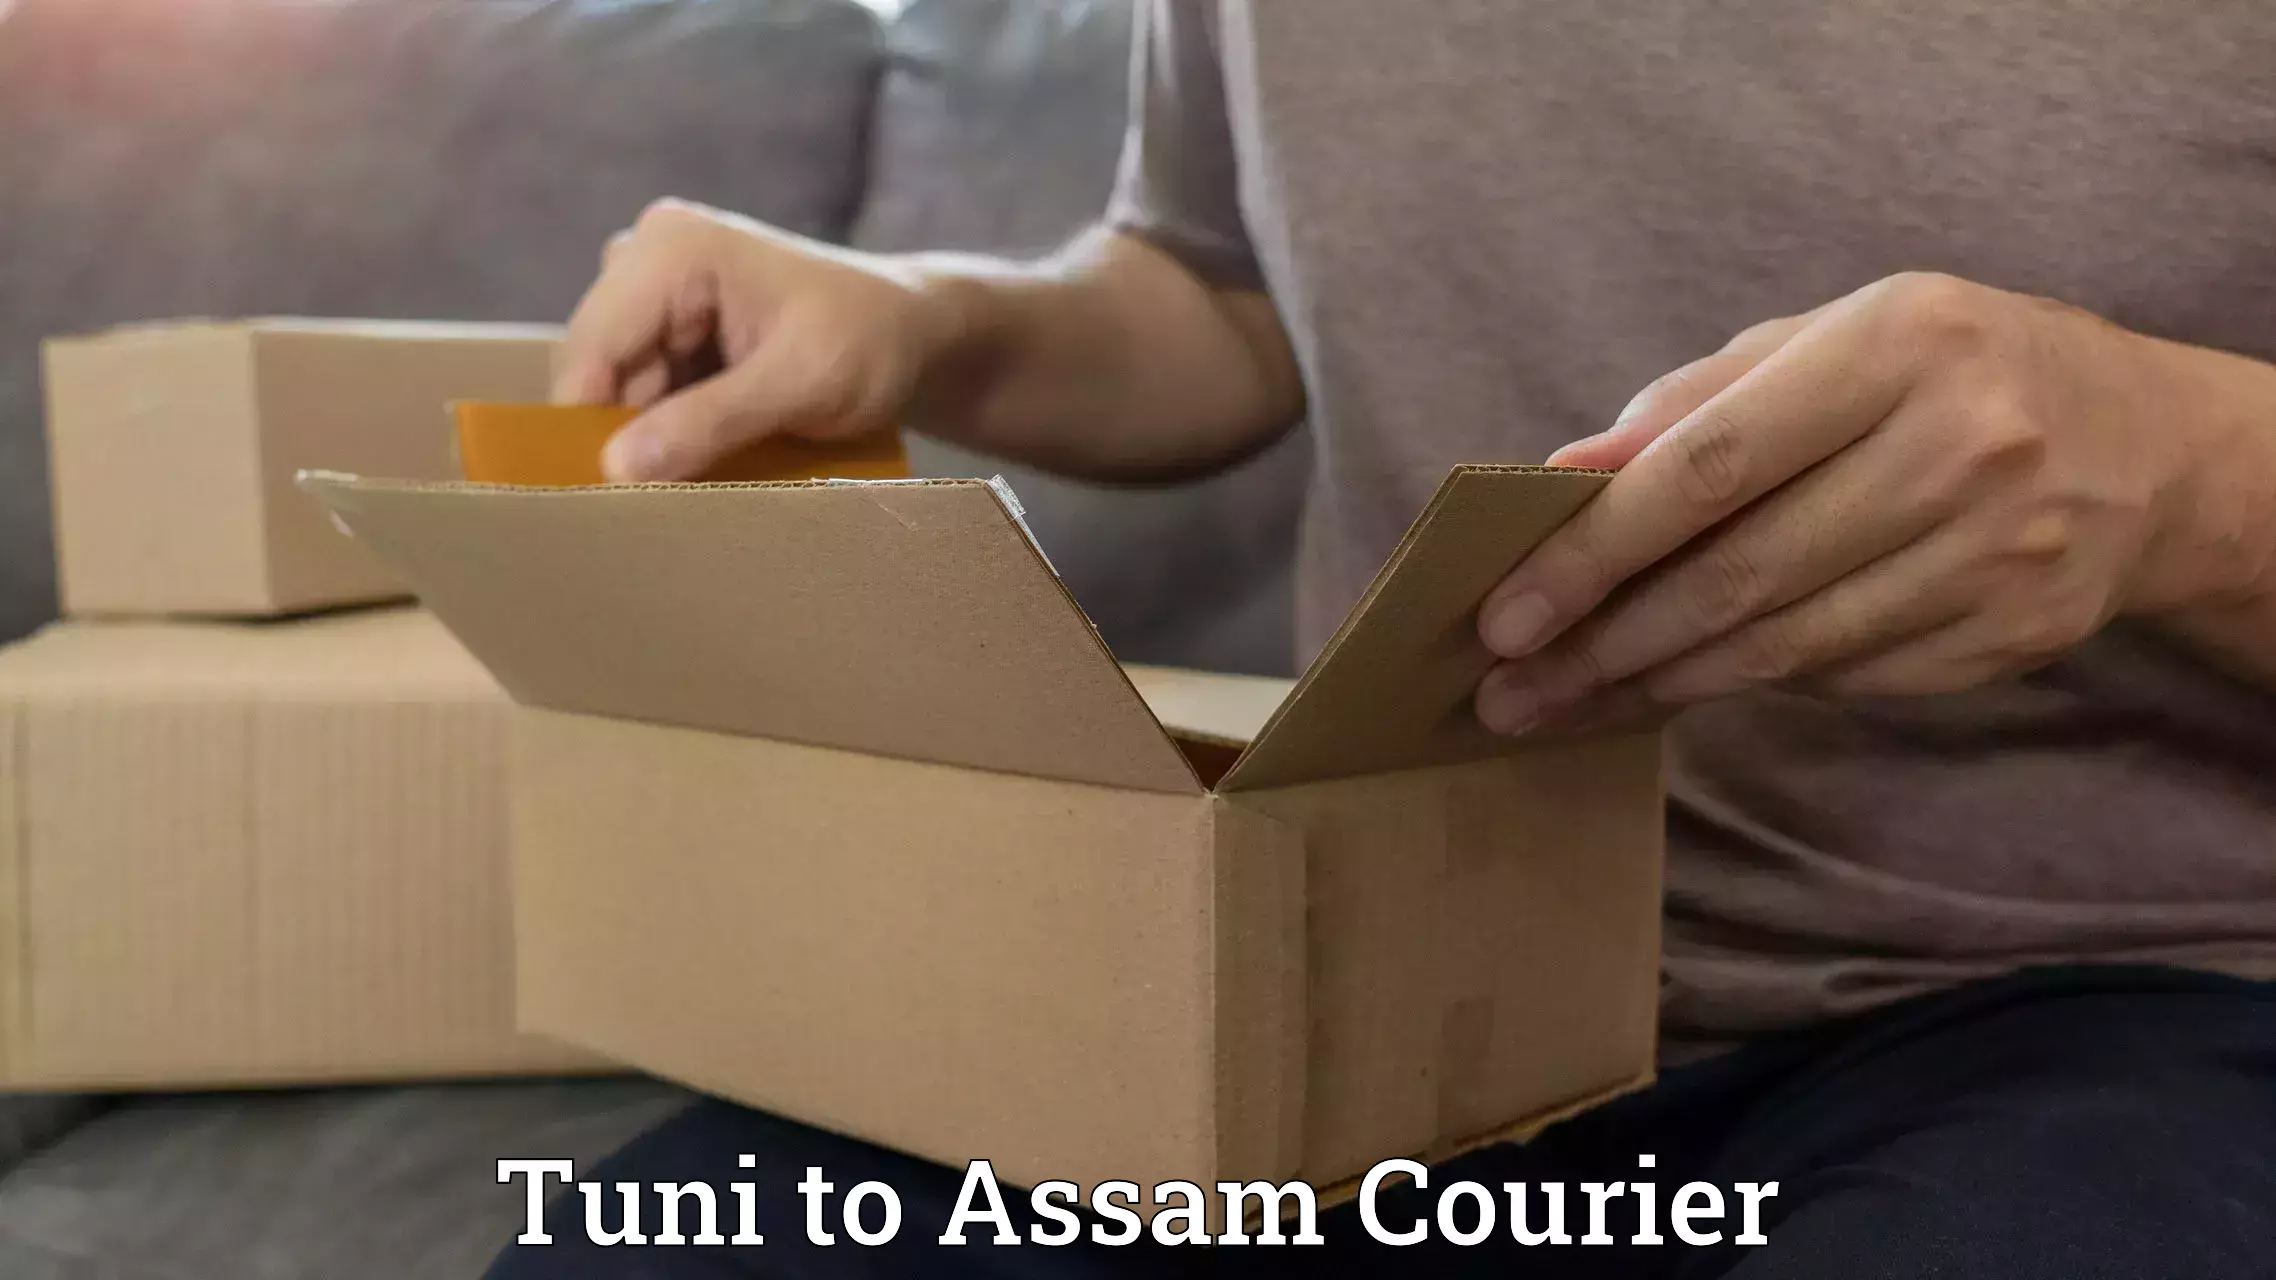 Courier service partnerships in Tuni to Assam